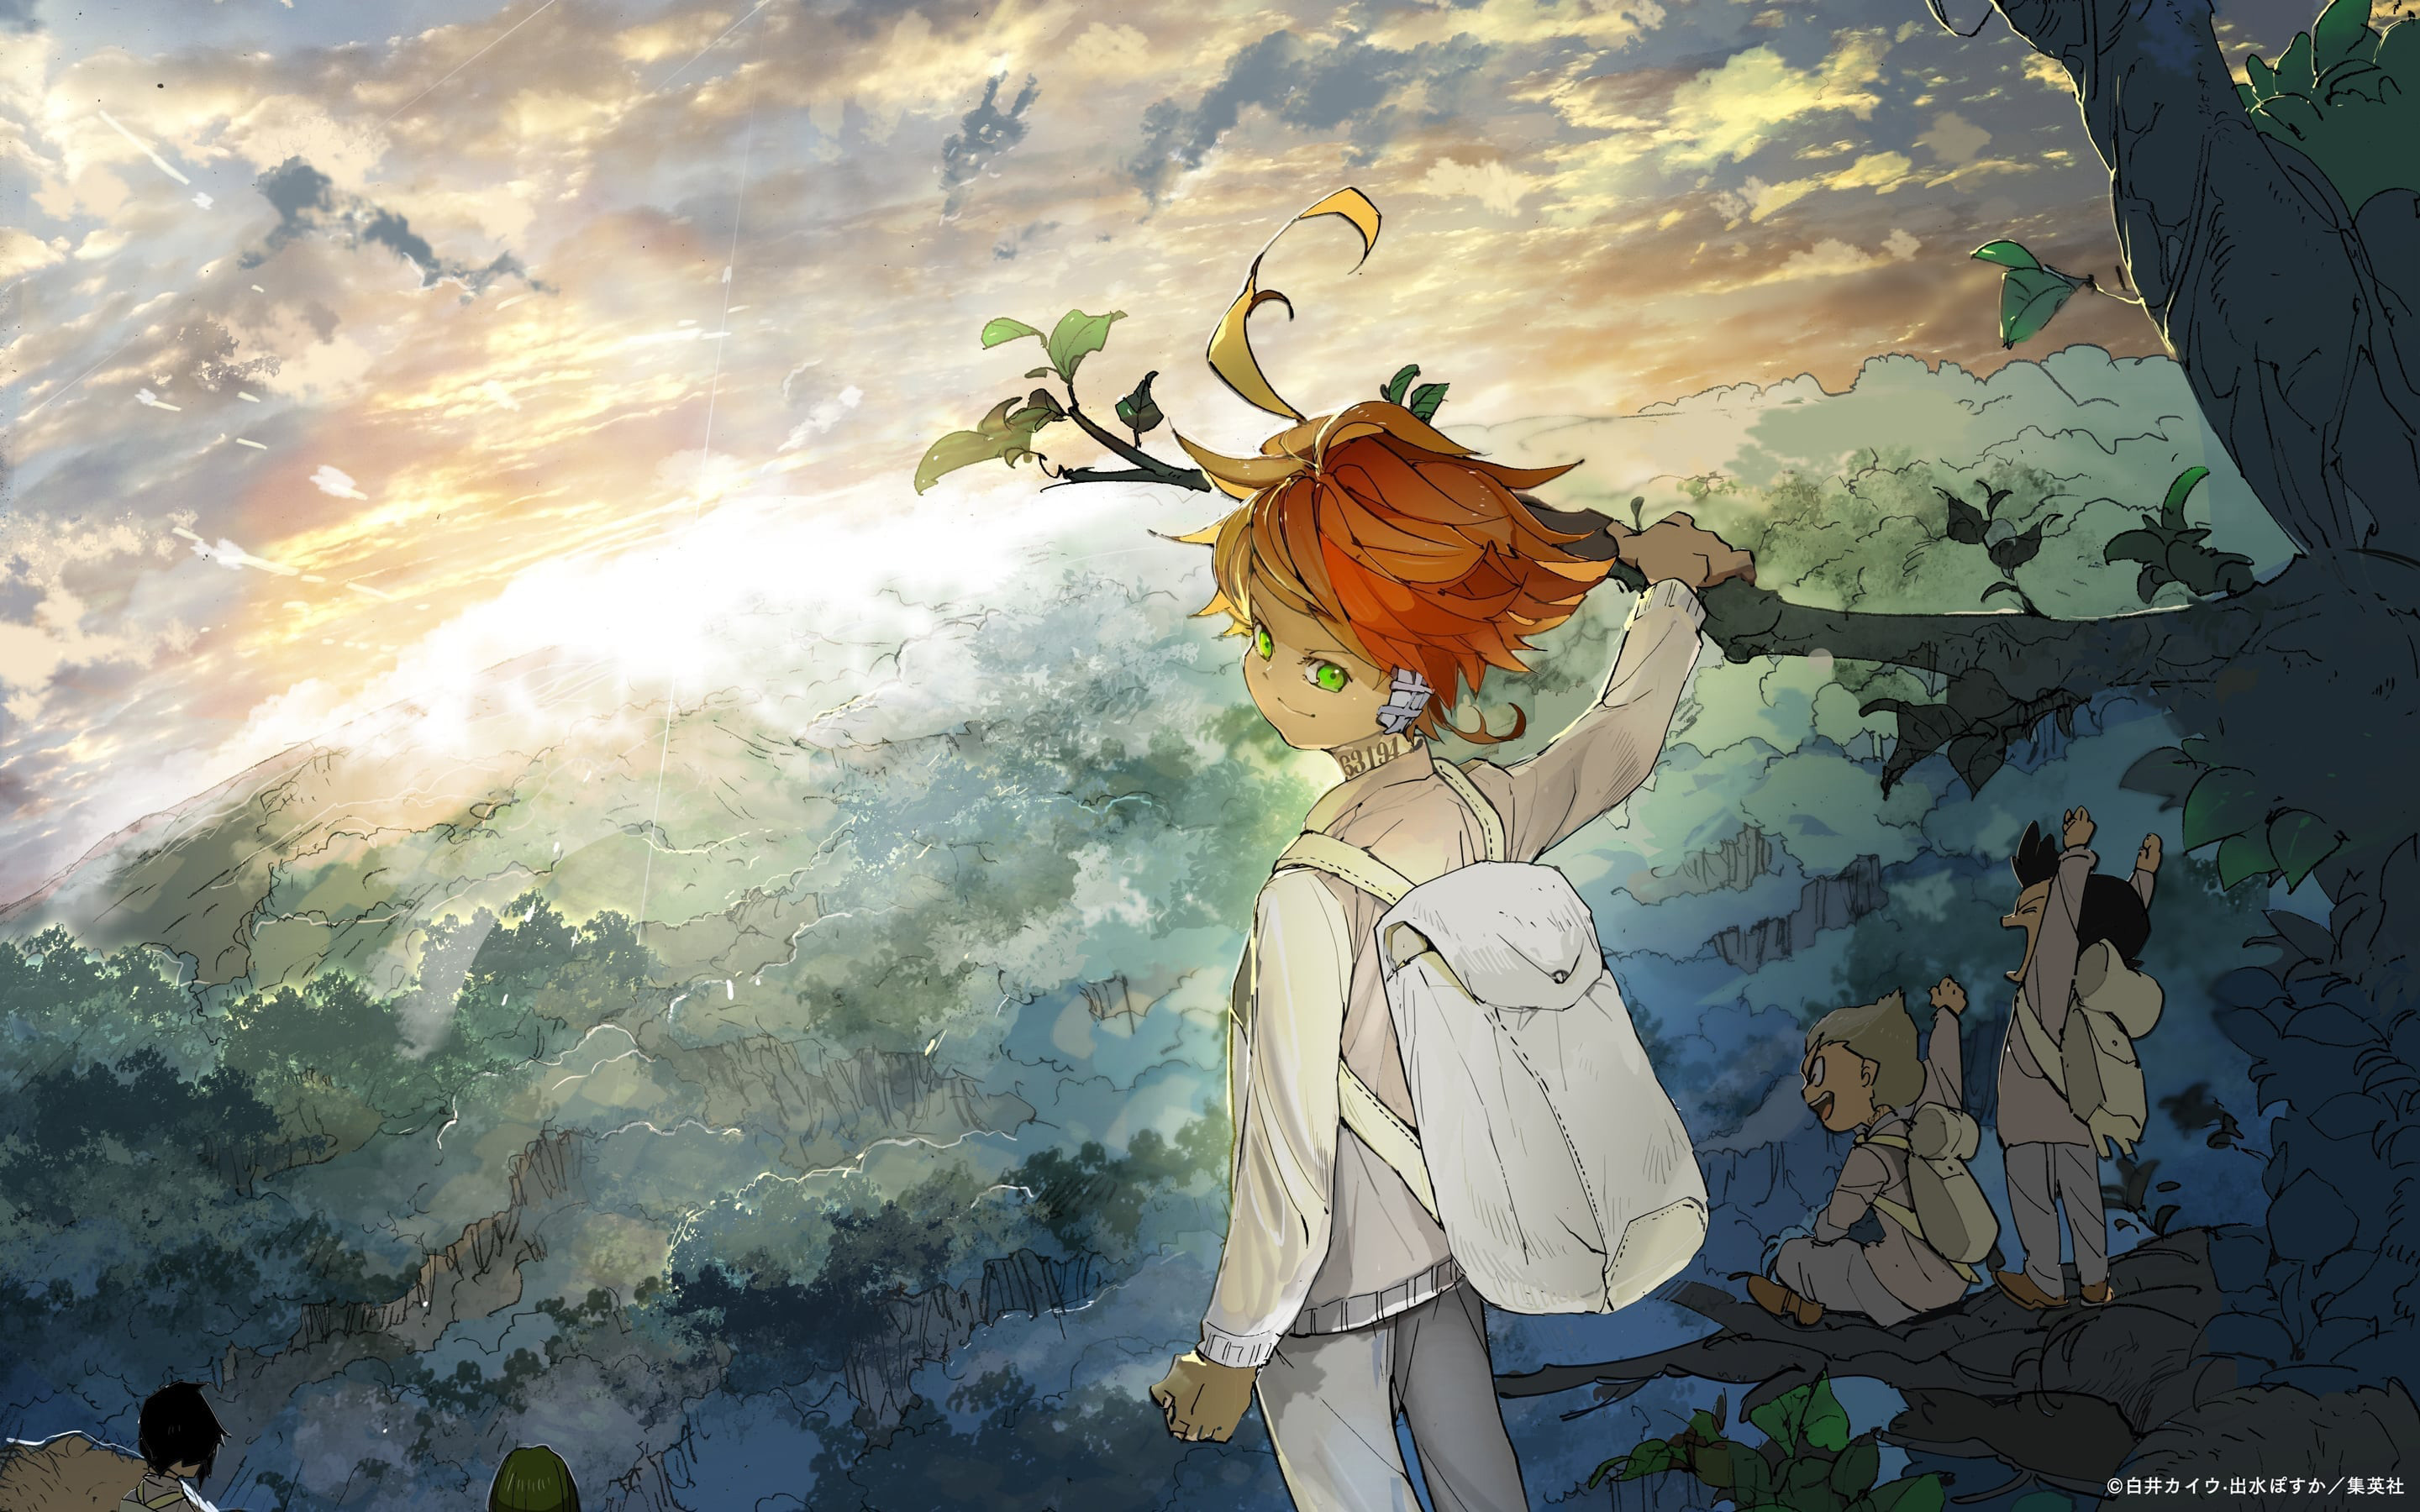 2880x1800 The Promised Neverland HD Wallpaper | Hintergrund |  | ID:971571 -  Wallpaper Abyss